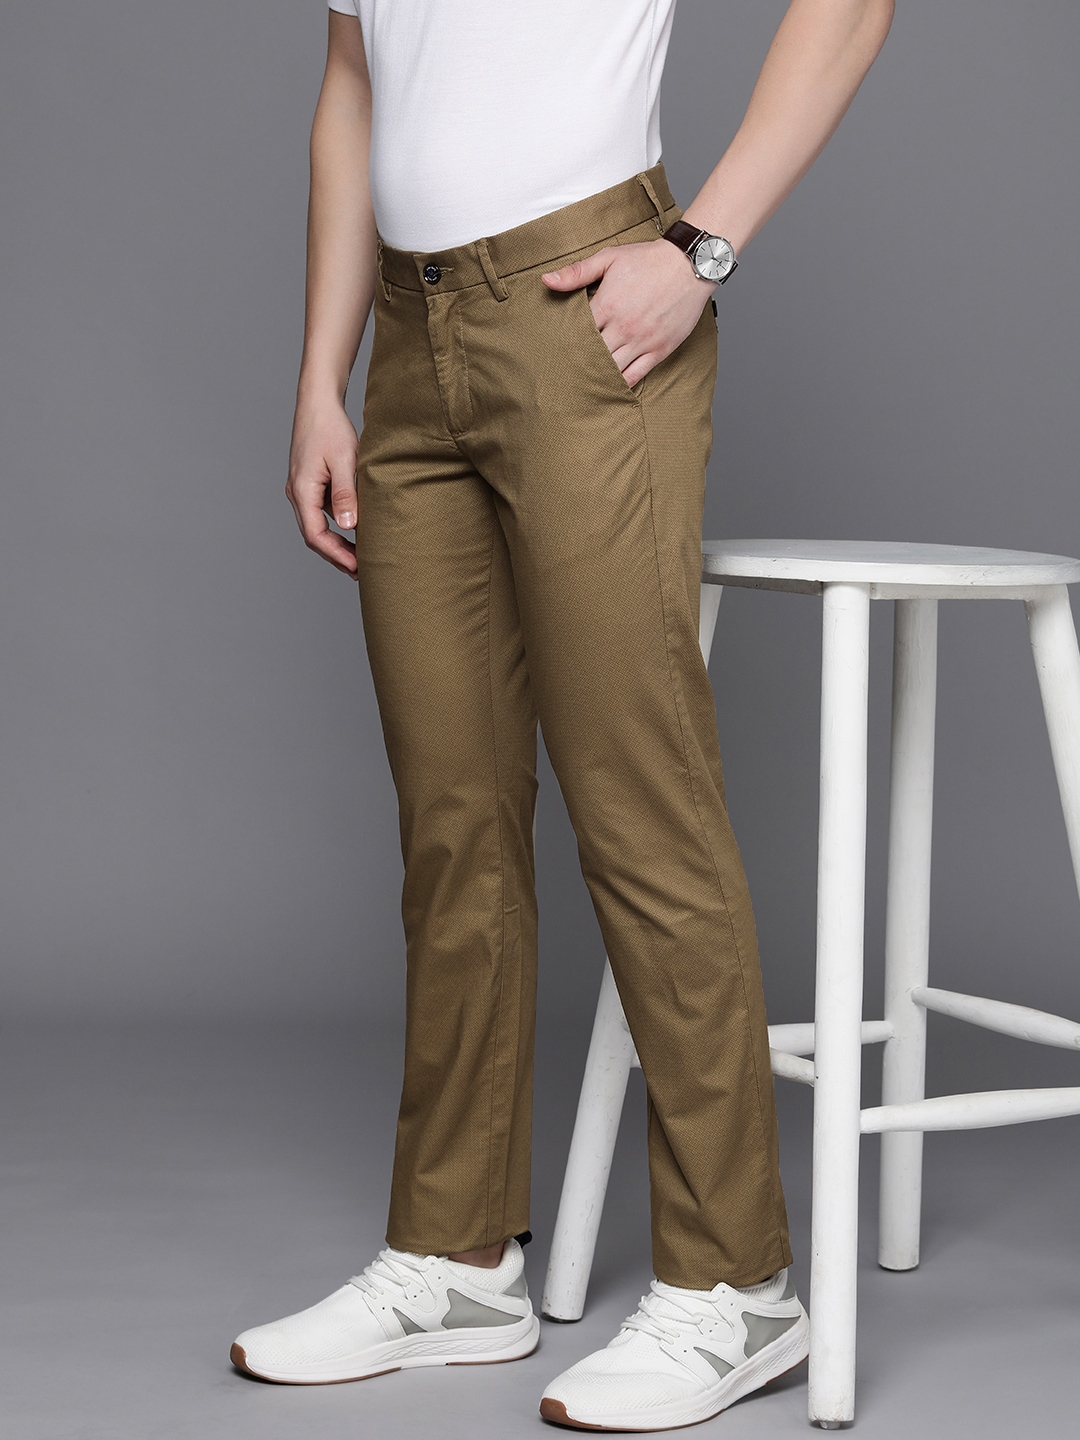 Allen Solly Casual Trousers  Buy Allen Solly Men Grey Slim Fit Check  Casual Trousers Online  Nykaa Fashion